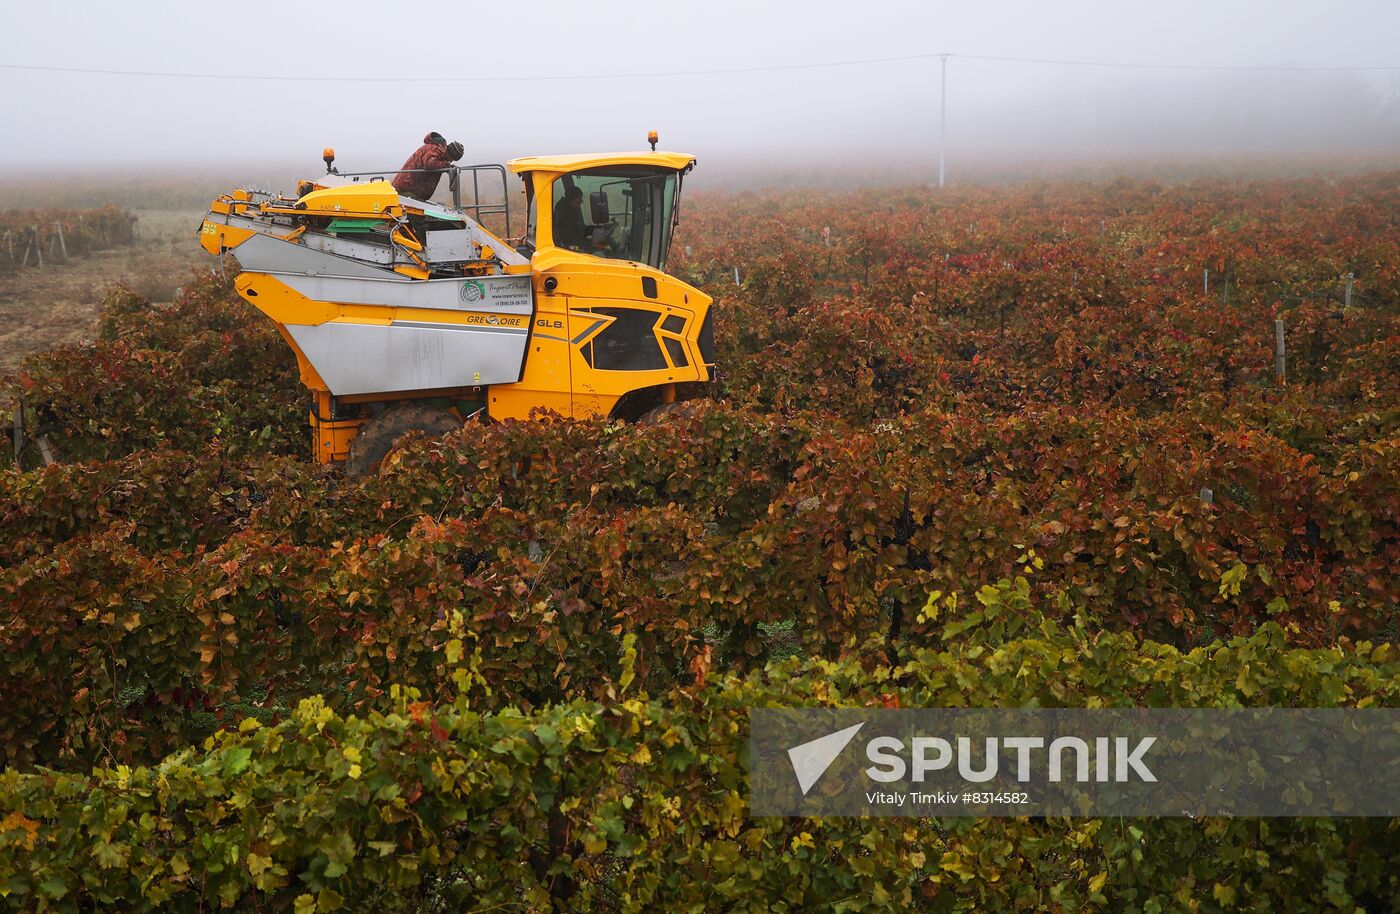 Russia Agriculture Grape Harvest